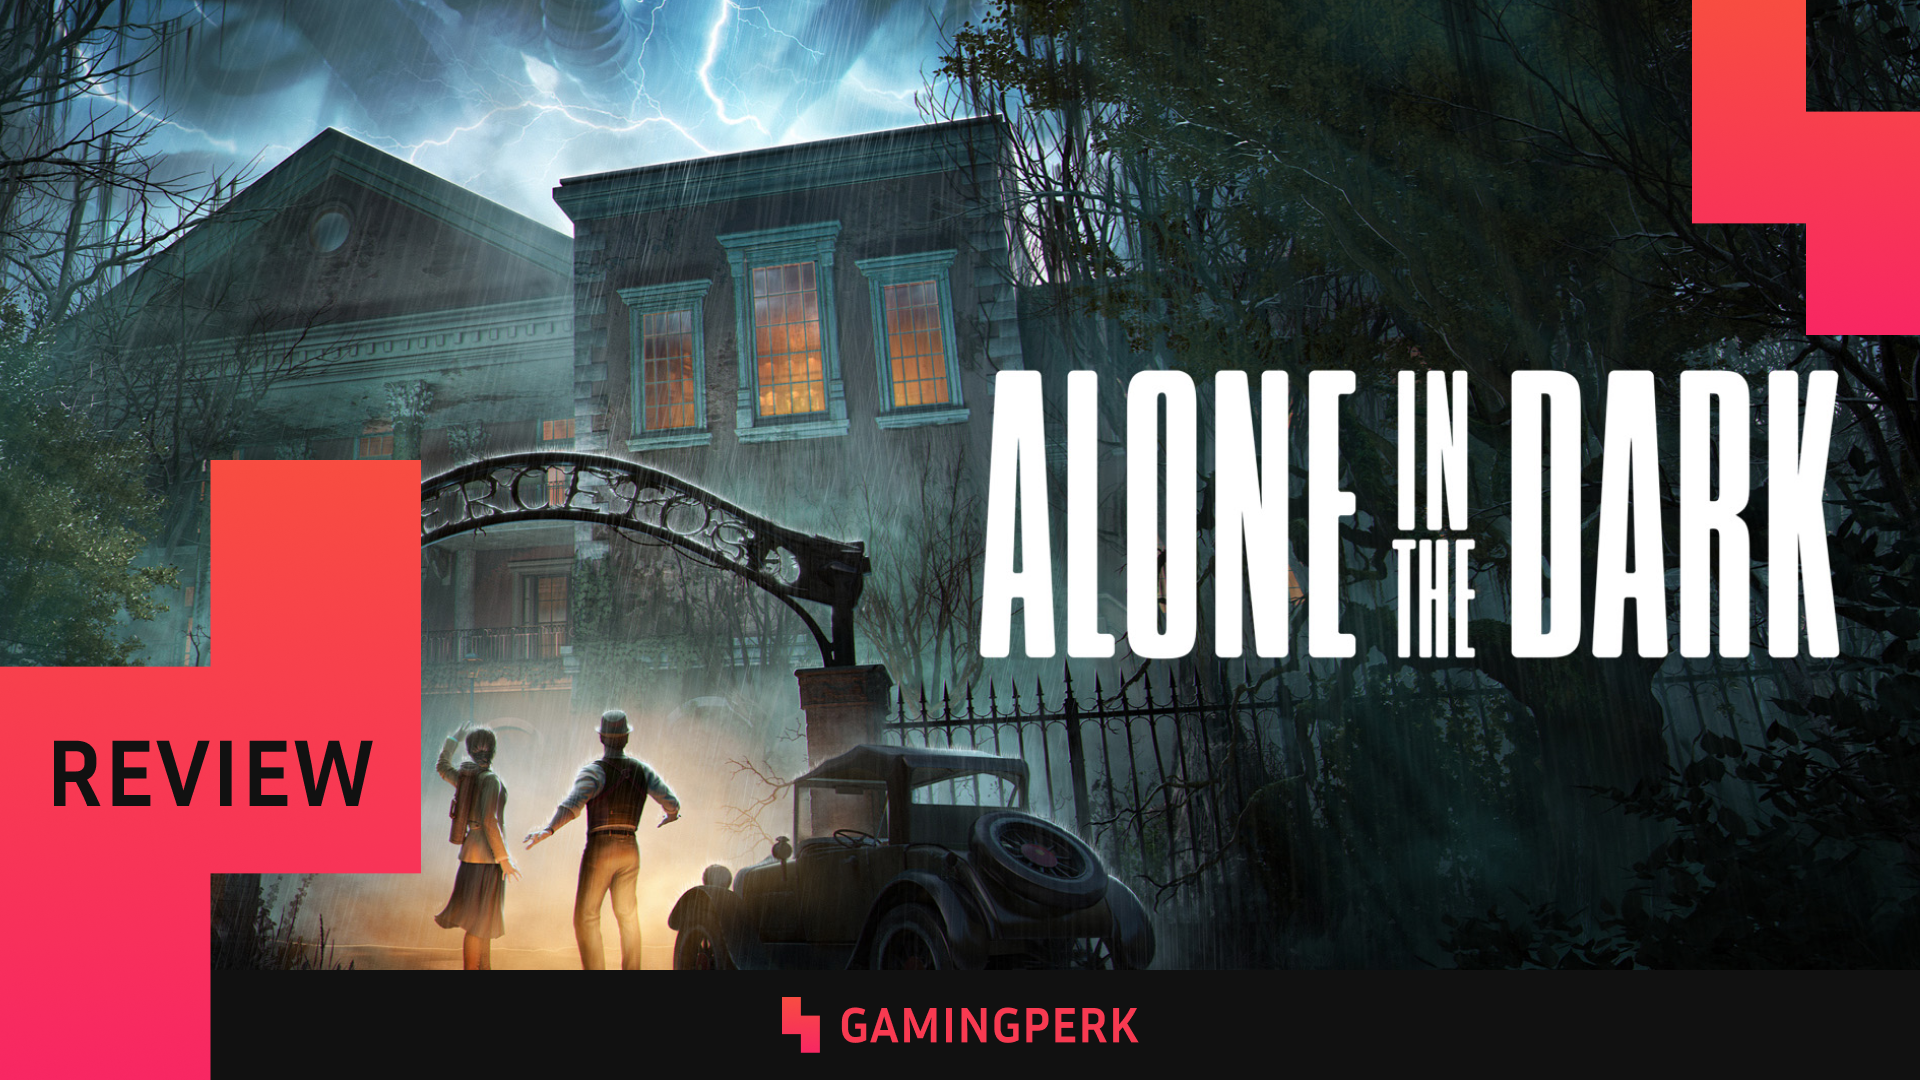 A review of Alone in the Dark 2024, the reboot of the cult horror franchise